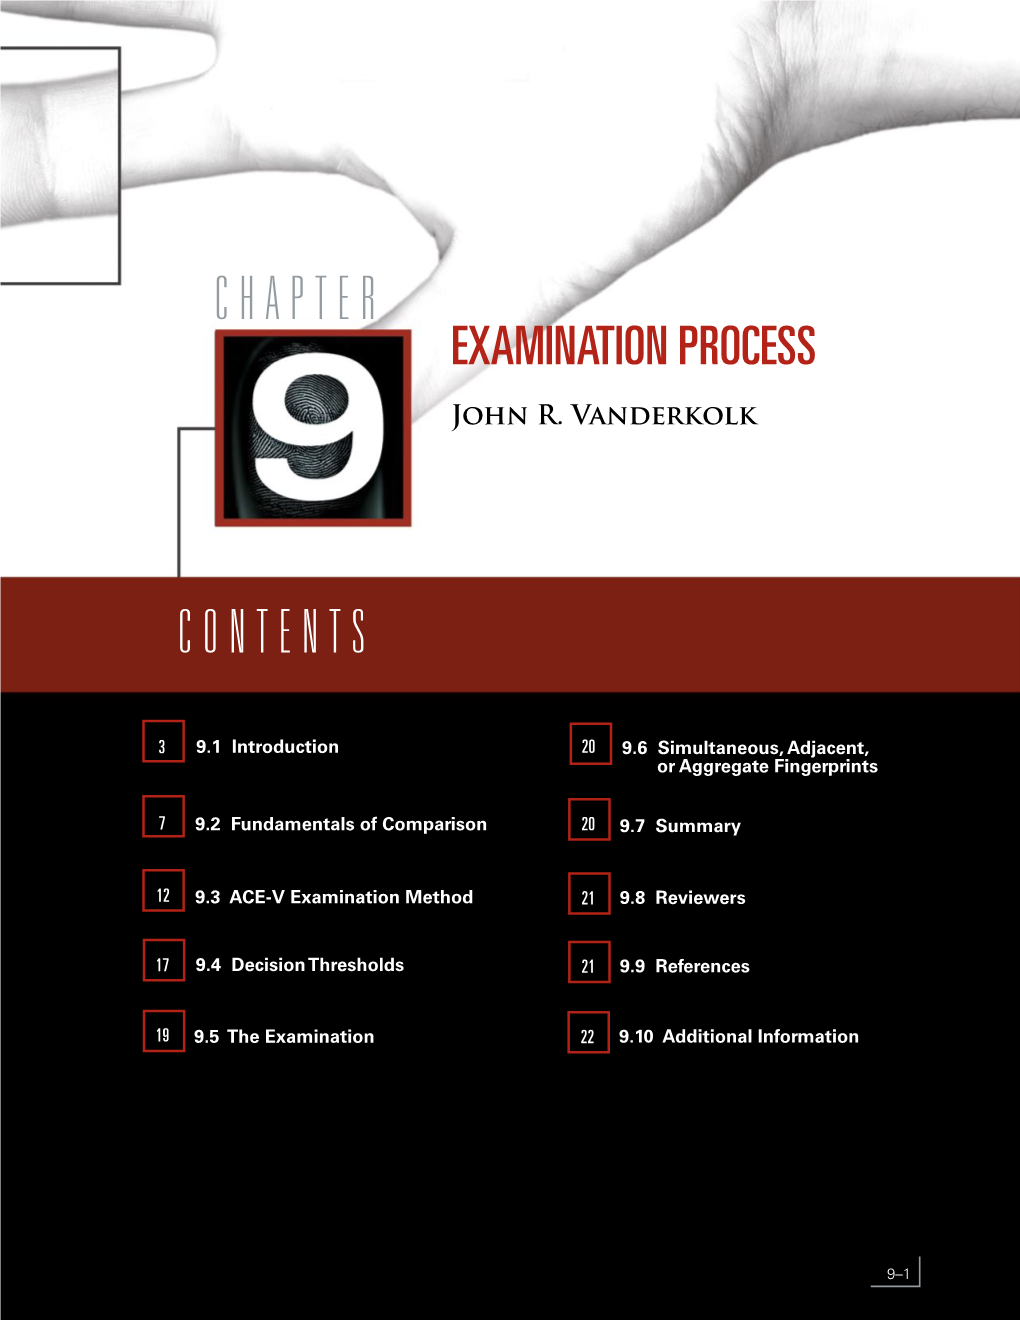 ACE-V Examination Method 21 9.8 Reviewers